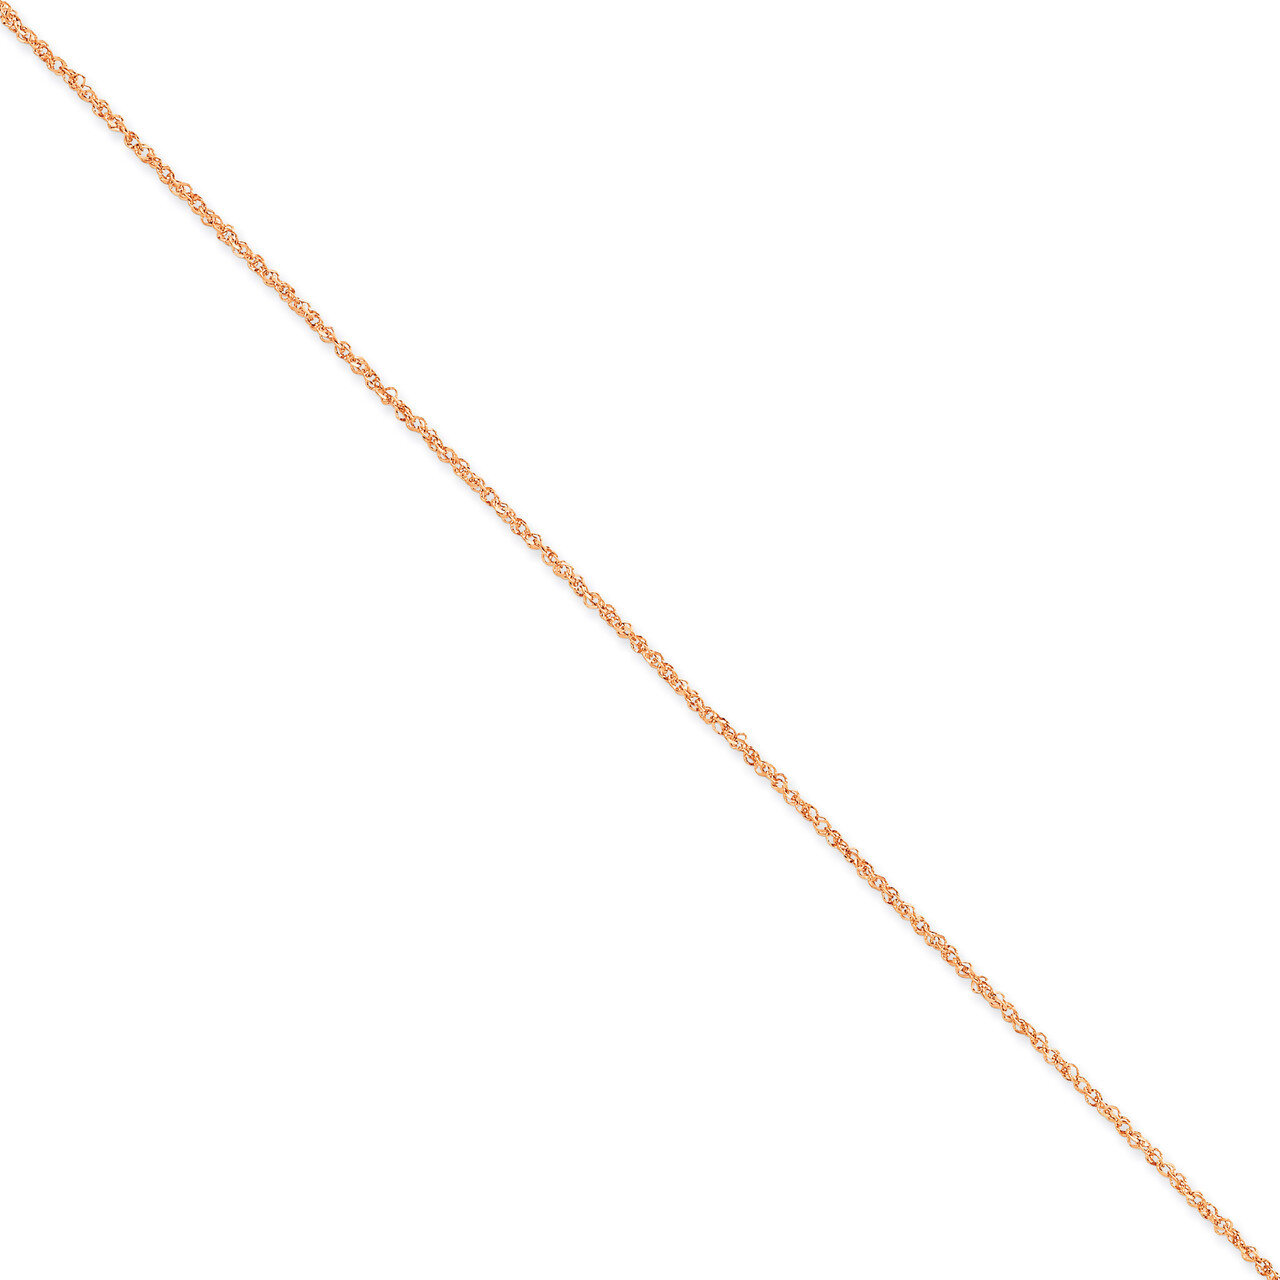 1.7mm Ropa Chain 18 Inch 14k Rose Gold RSC28-18